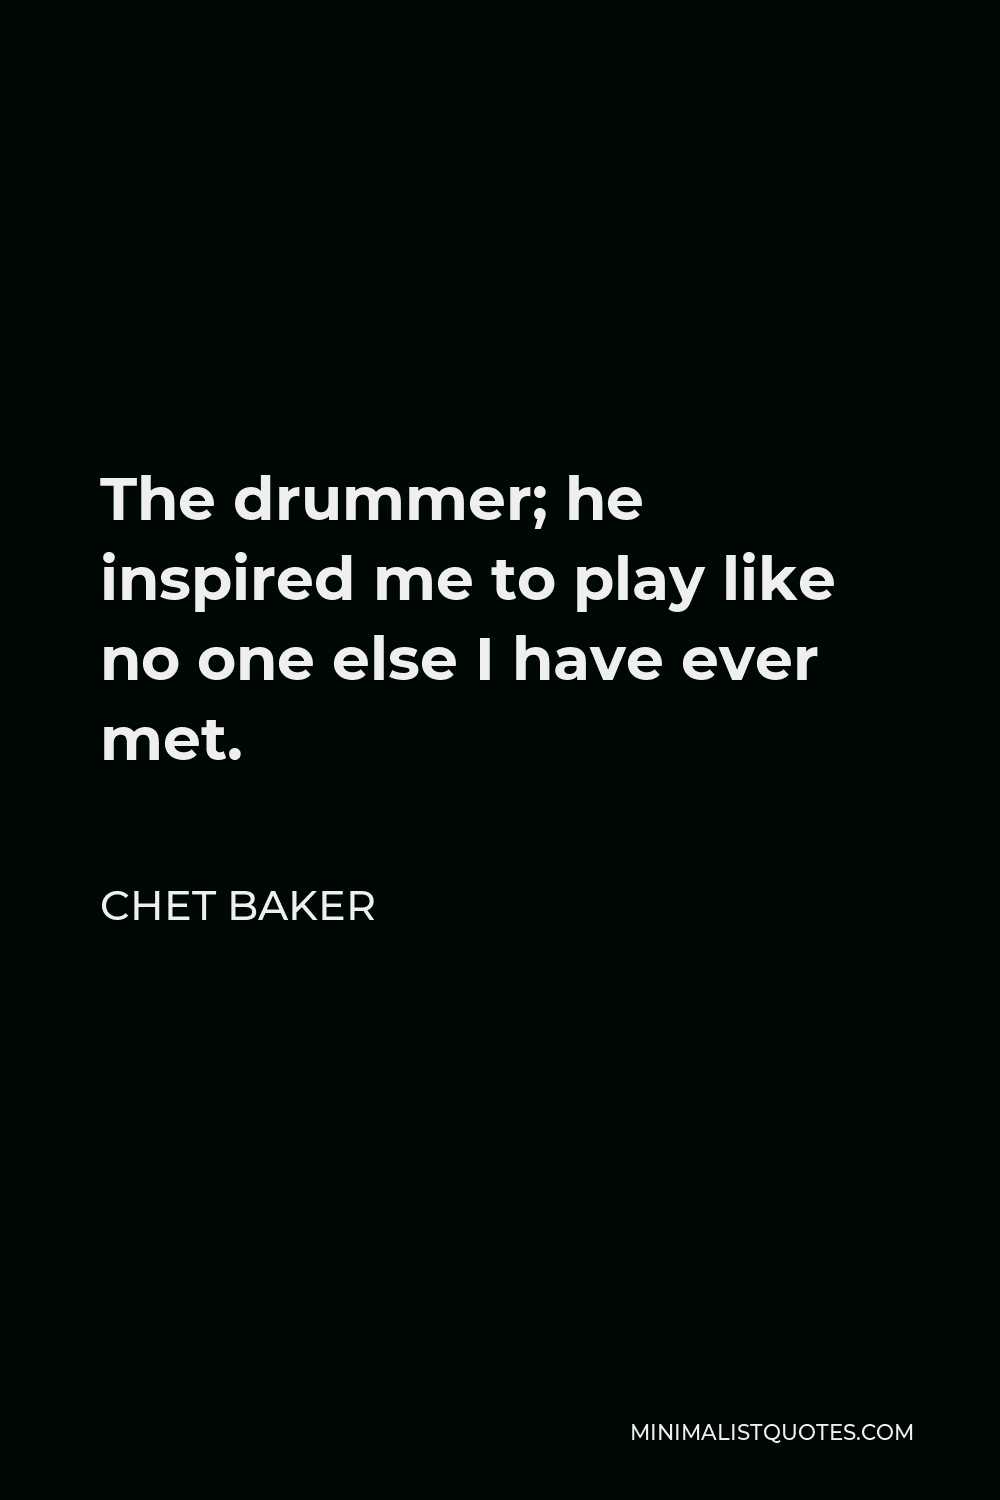 Chet Baker Quote The Drummer He Inspired Me To Play Like No One Else I Have Ever Met 